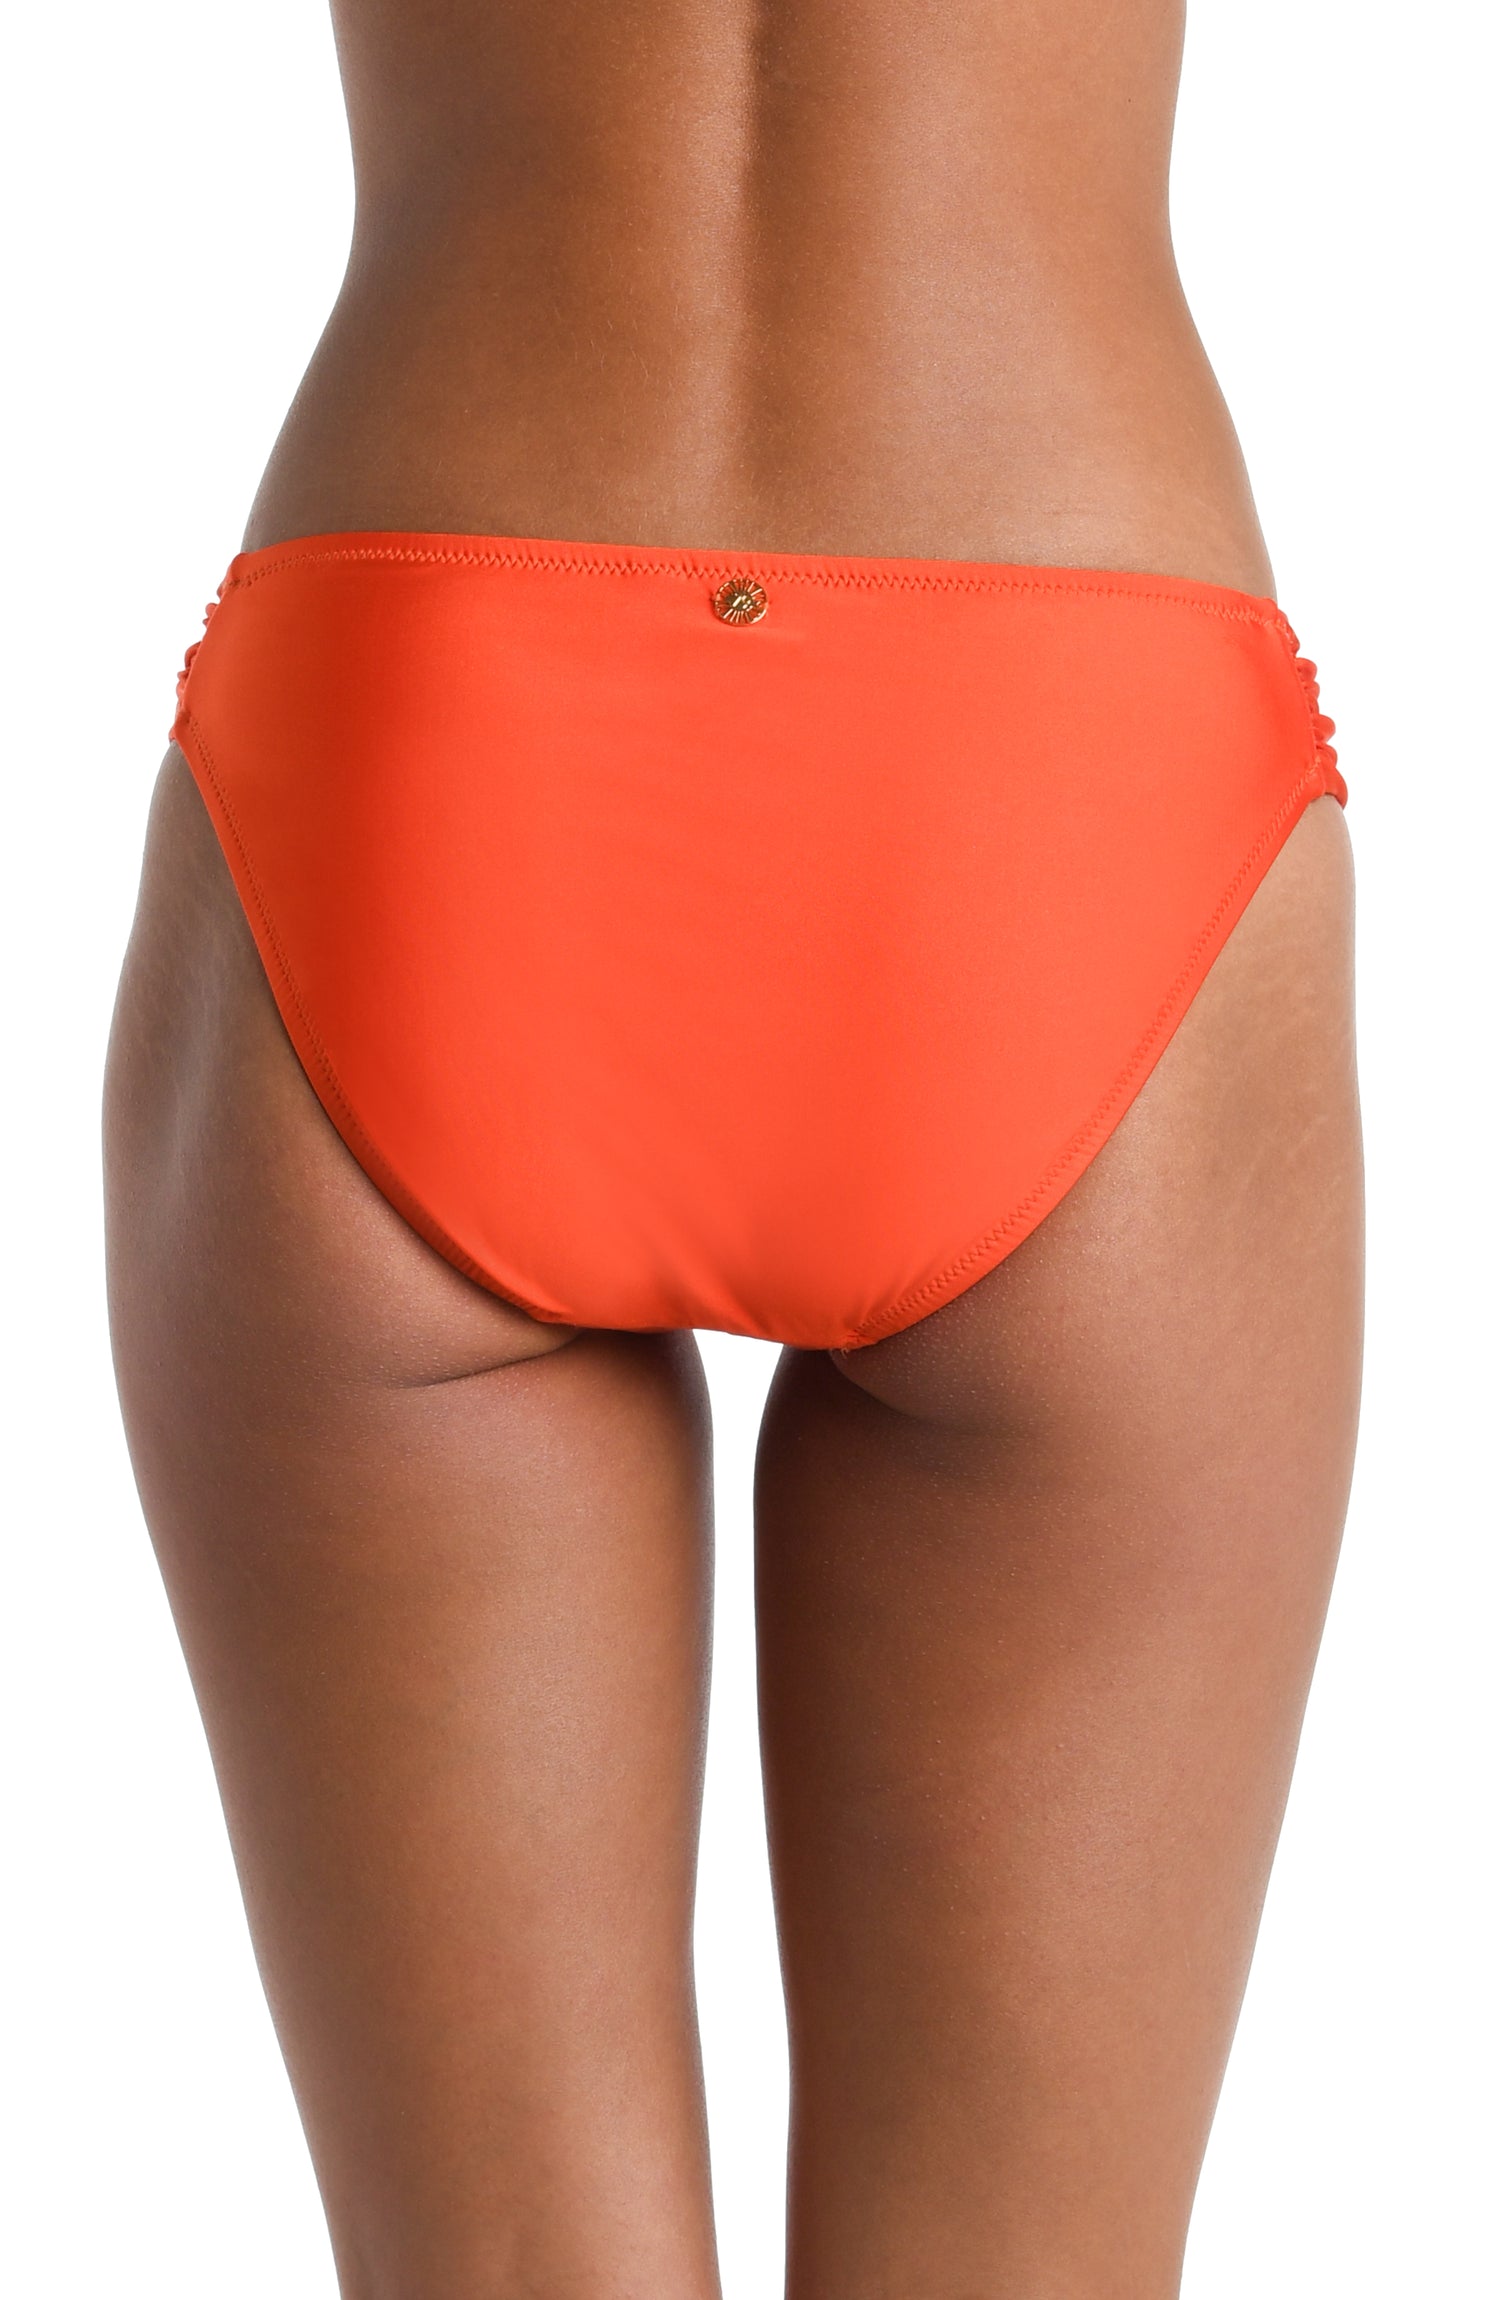 Model is wearing a solid vibrant orange colored Side Shirred Hipster Bottom